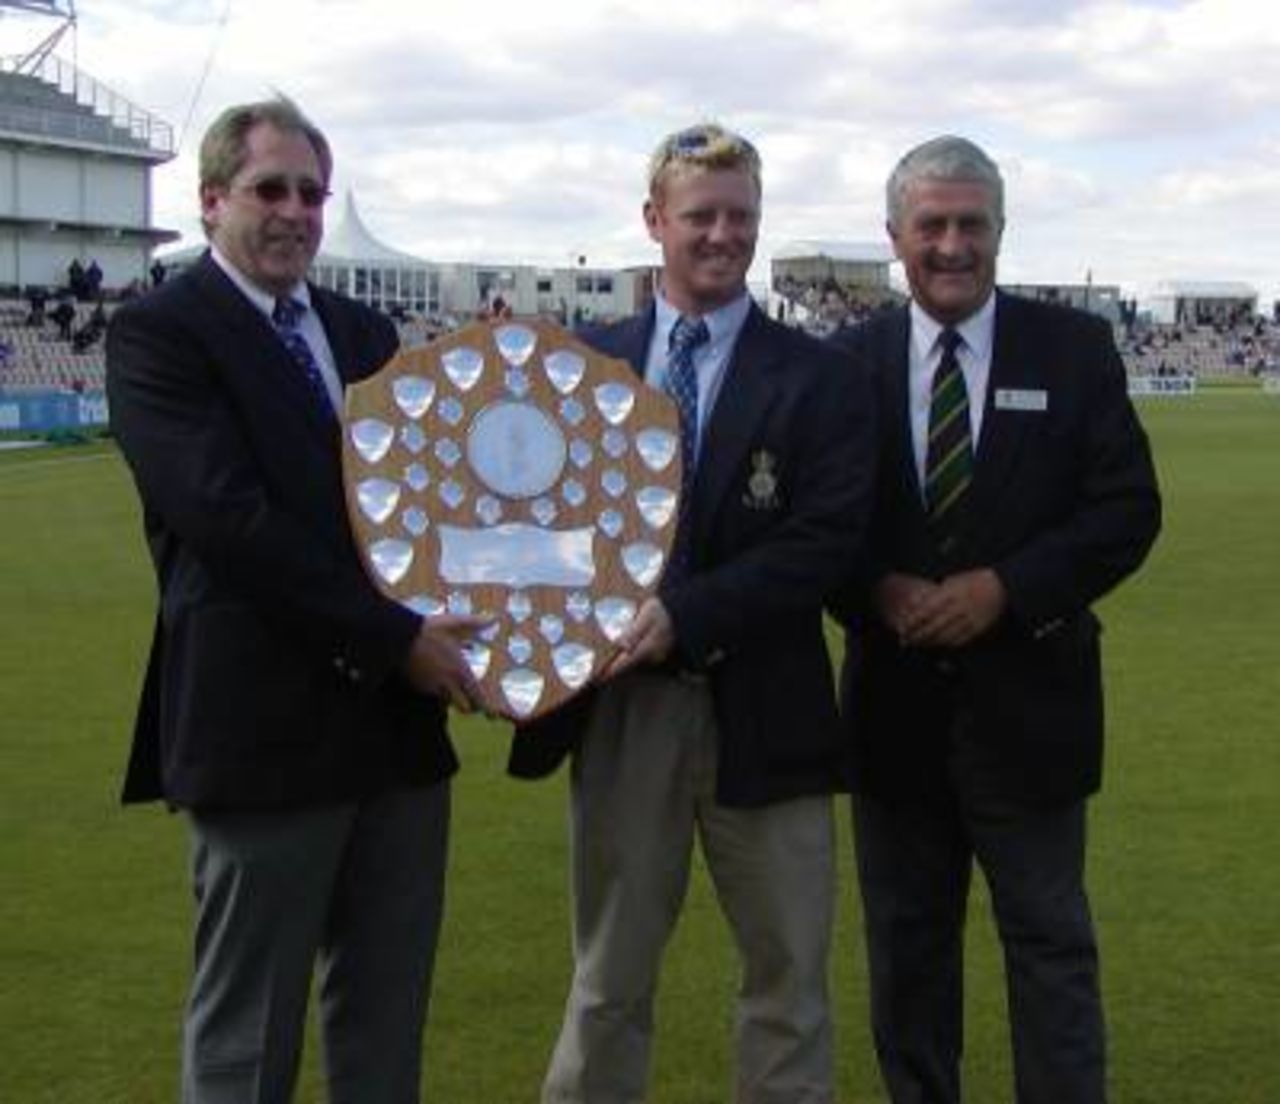 Hampshire 2nd XI captain Jason Laney receives the Shield from Hampshire chairman Rod Bransgrove at The Rose Bowl.